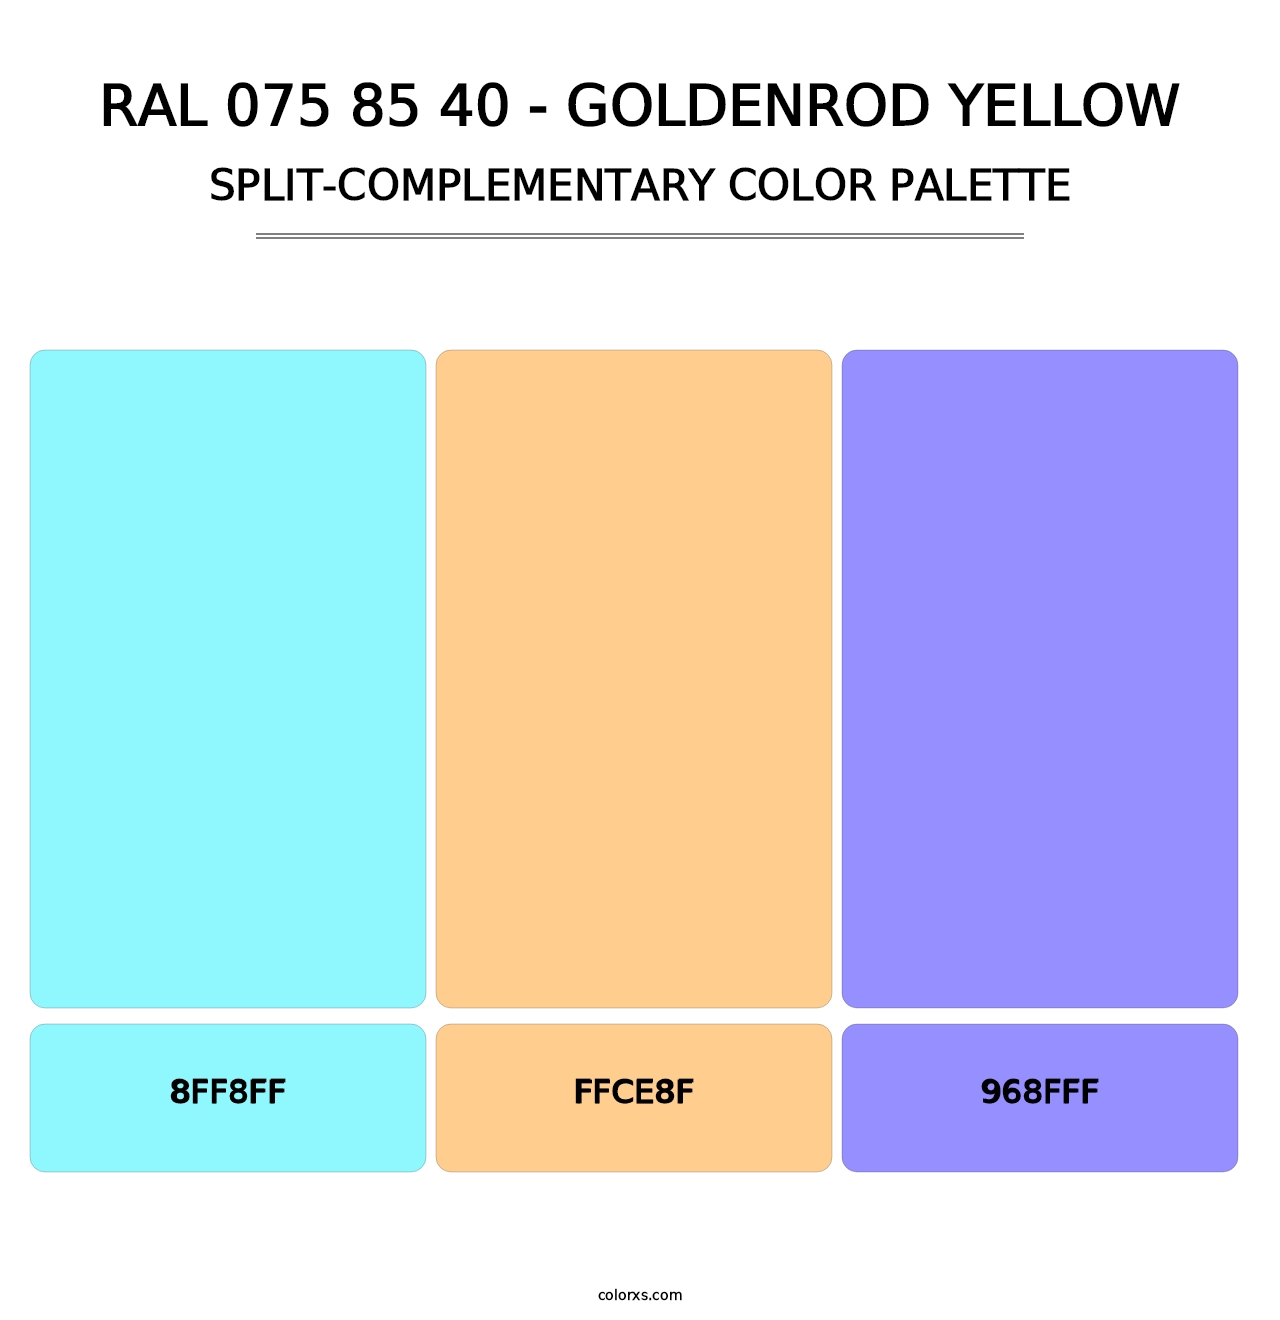 RAL 075 85 40 - Goldenrod Yellow - Split-Complementary Color Palette